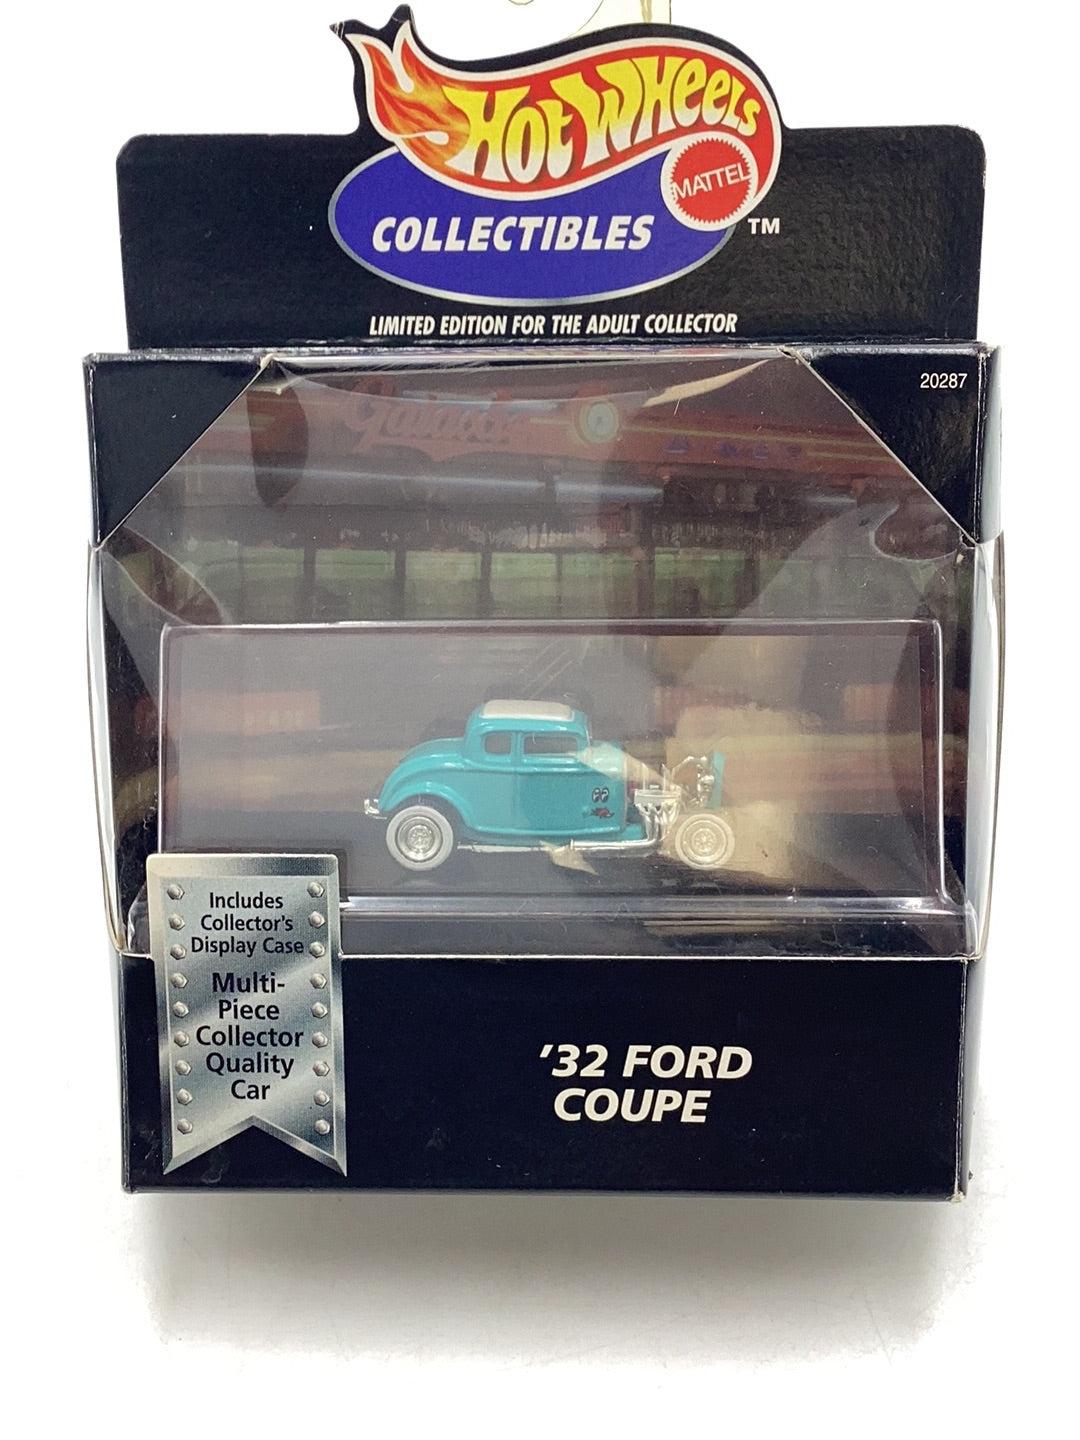 Hot Wheels Collectibles 32 Ford Coupe #8814